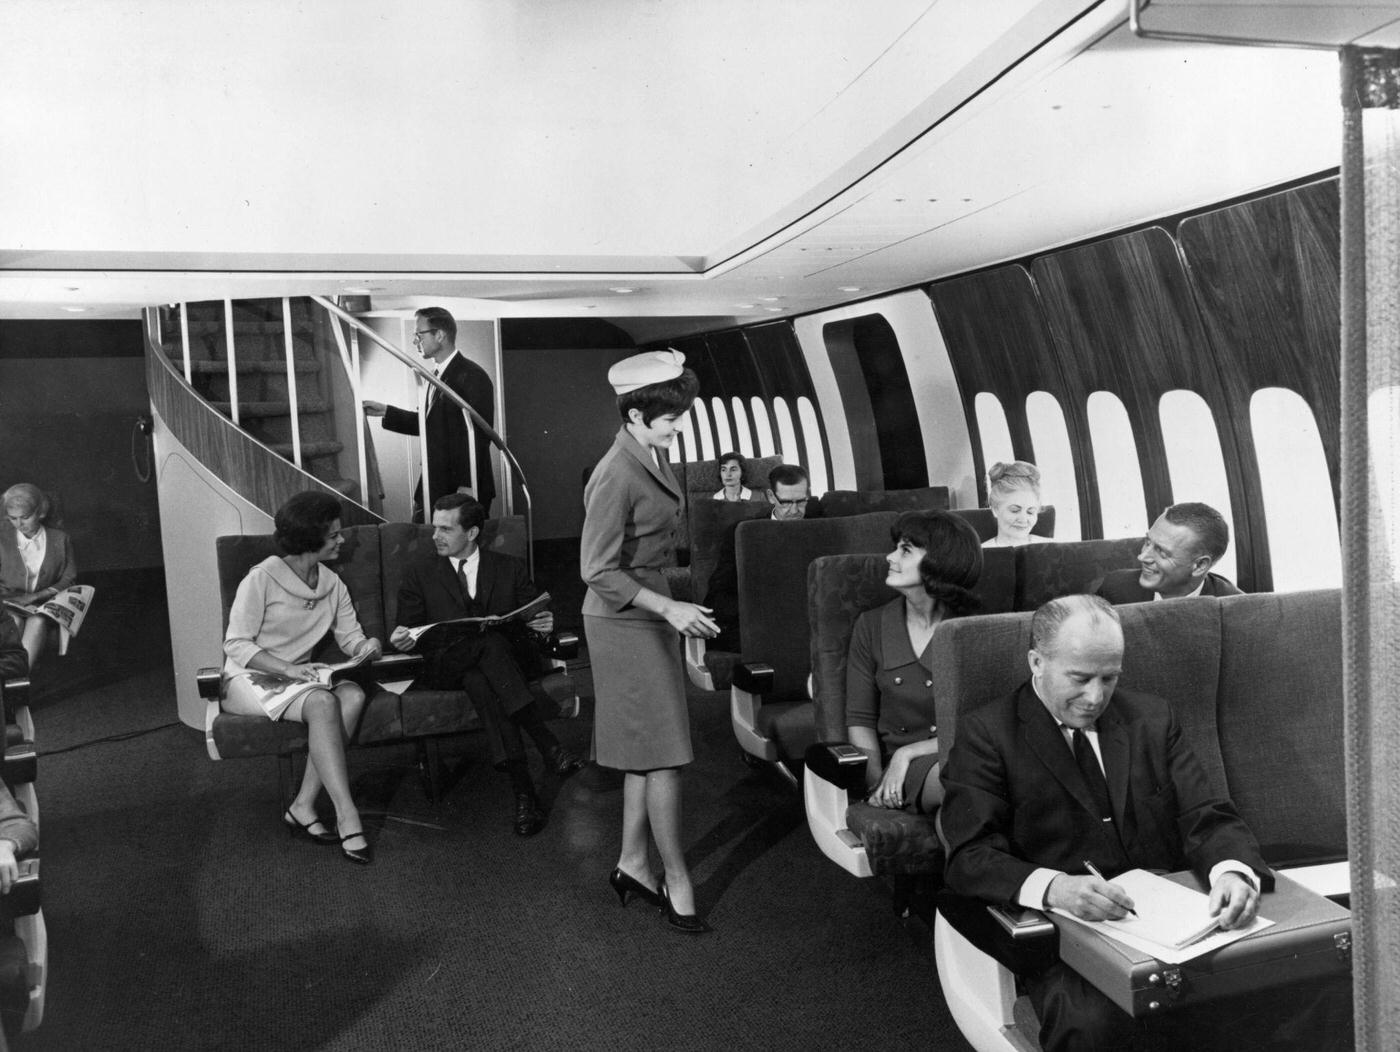 A demonstration of the new Boeing 747 passenger plane under development, which will carry up to 490 passengers in luxurious seats and include a stairway between decks, on May 13, 1968.